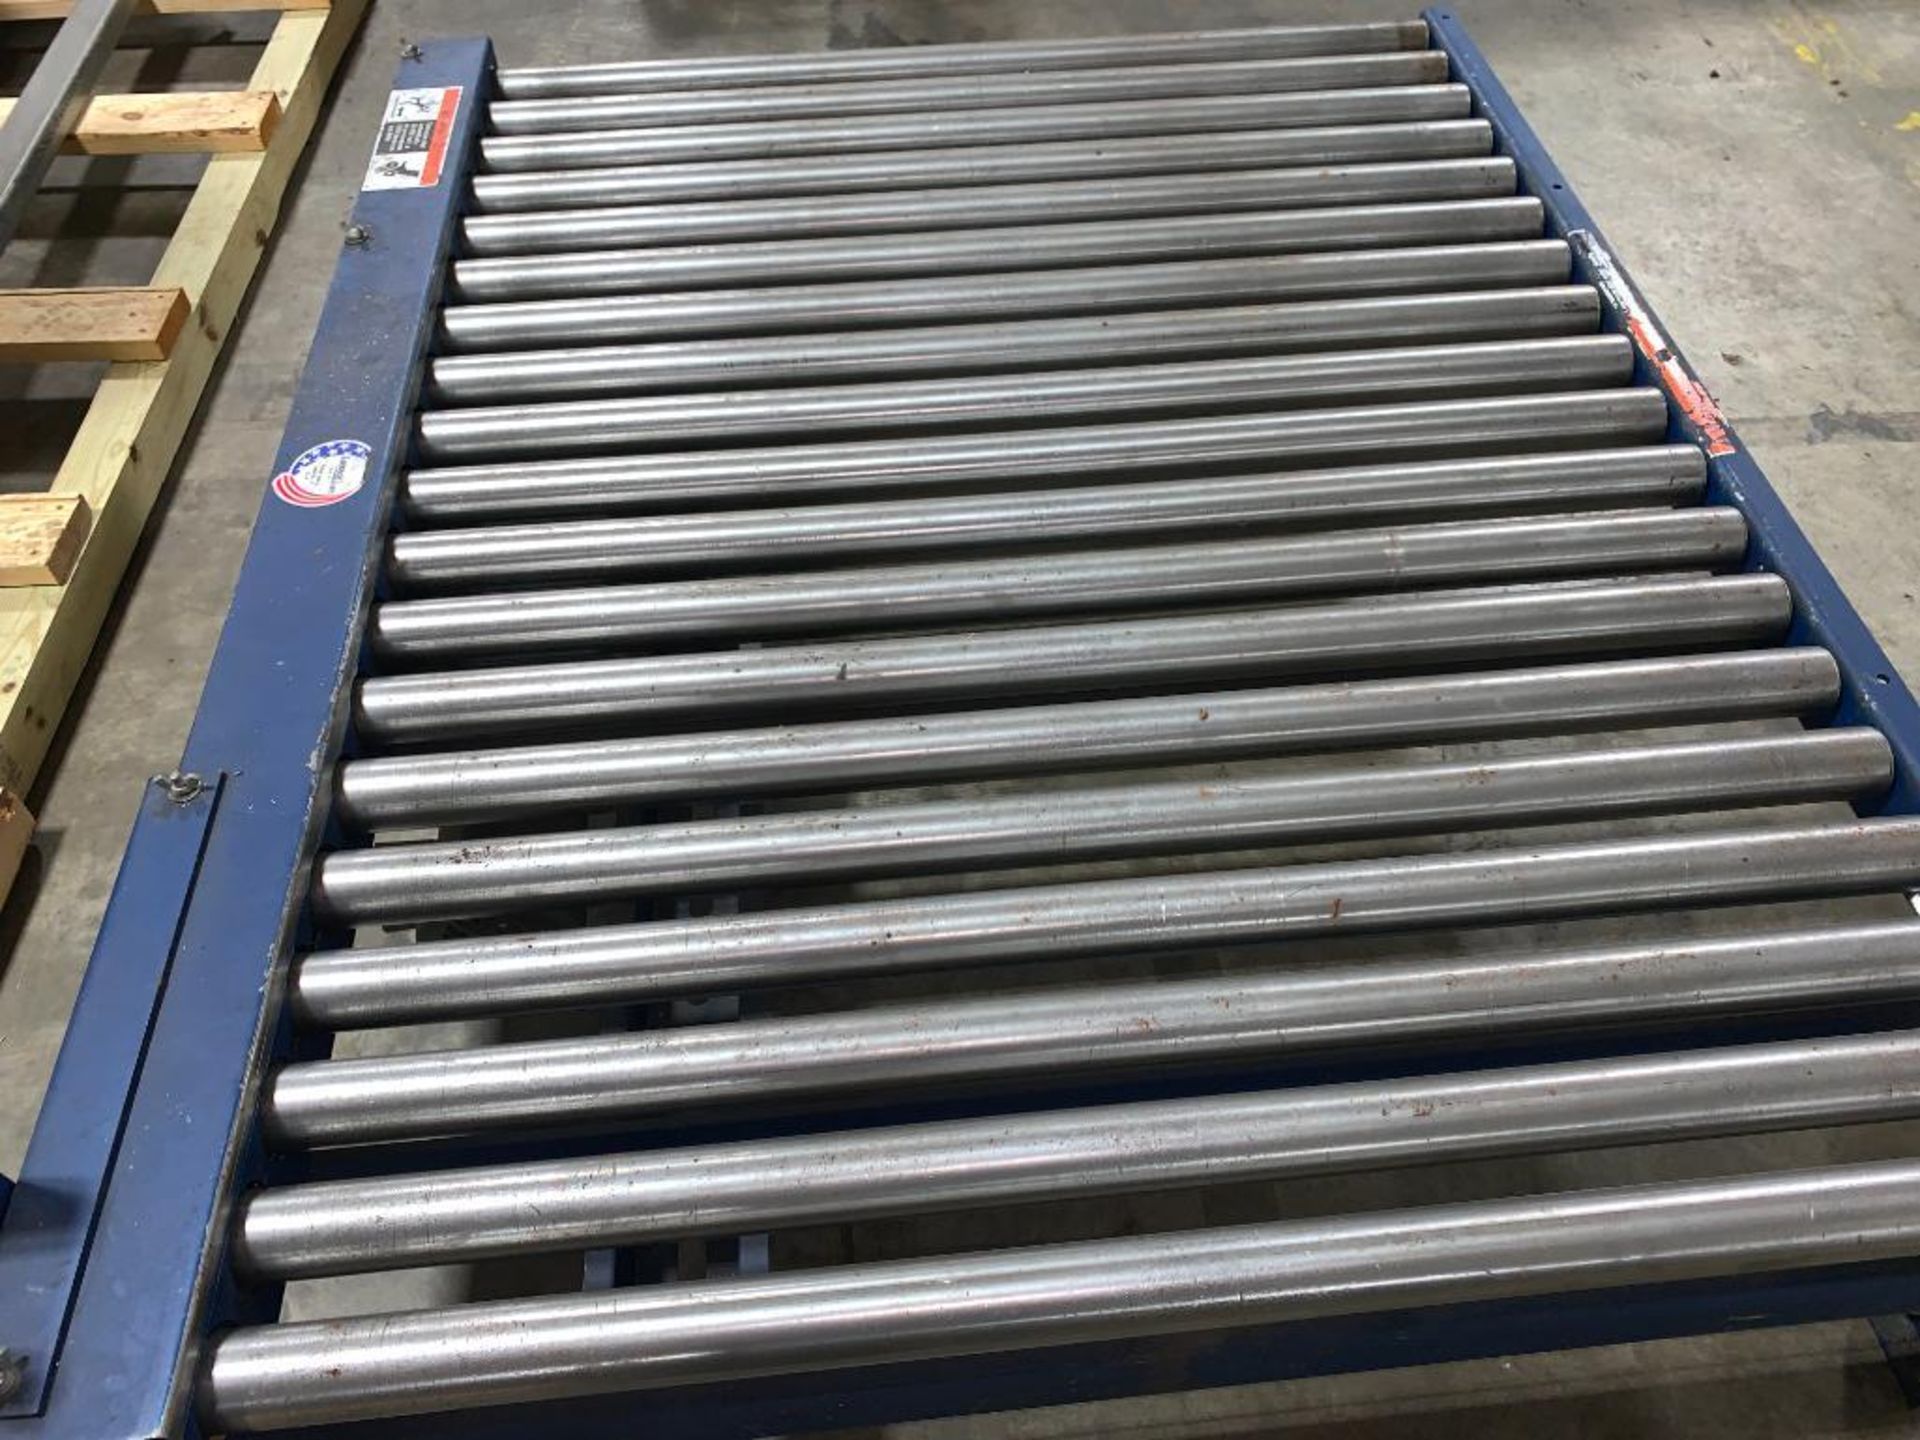 (6) skids of Lantech full pallet conveyor including turntable section - Located in Tifton, GA - Image 11 of 19